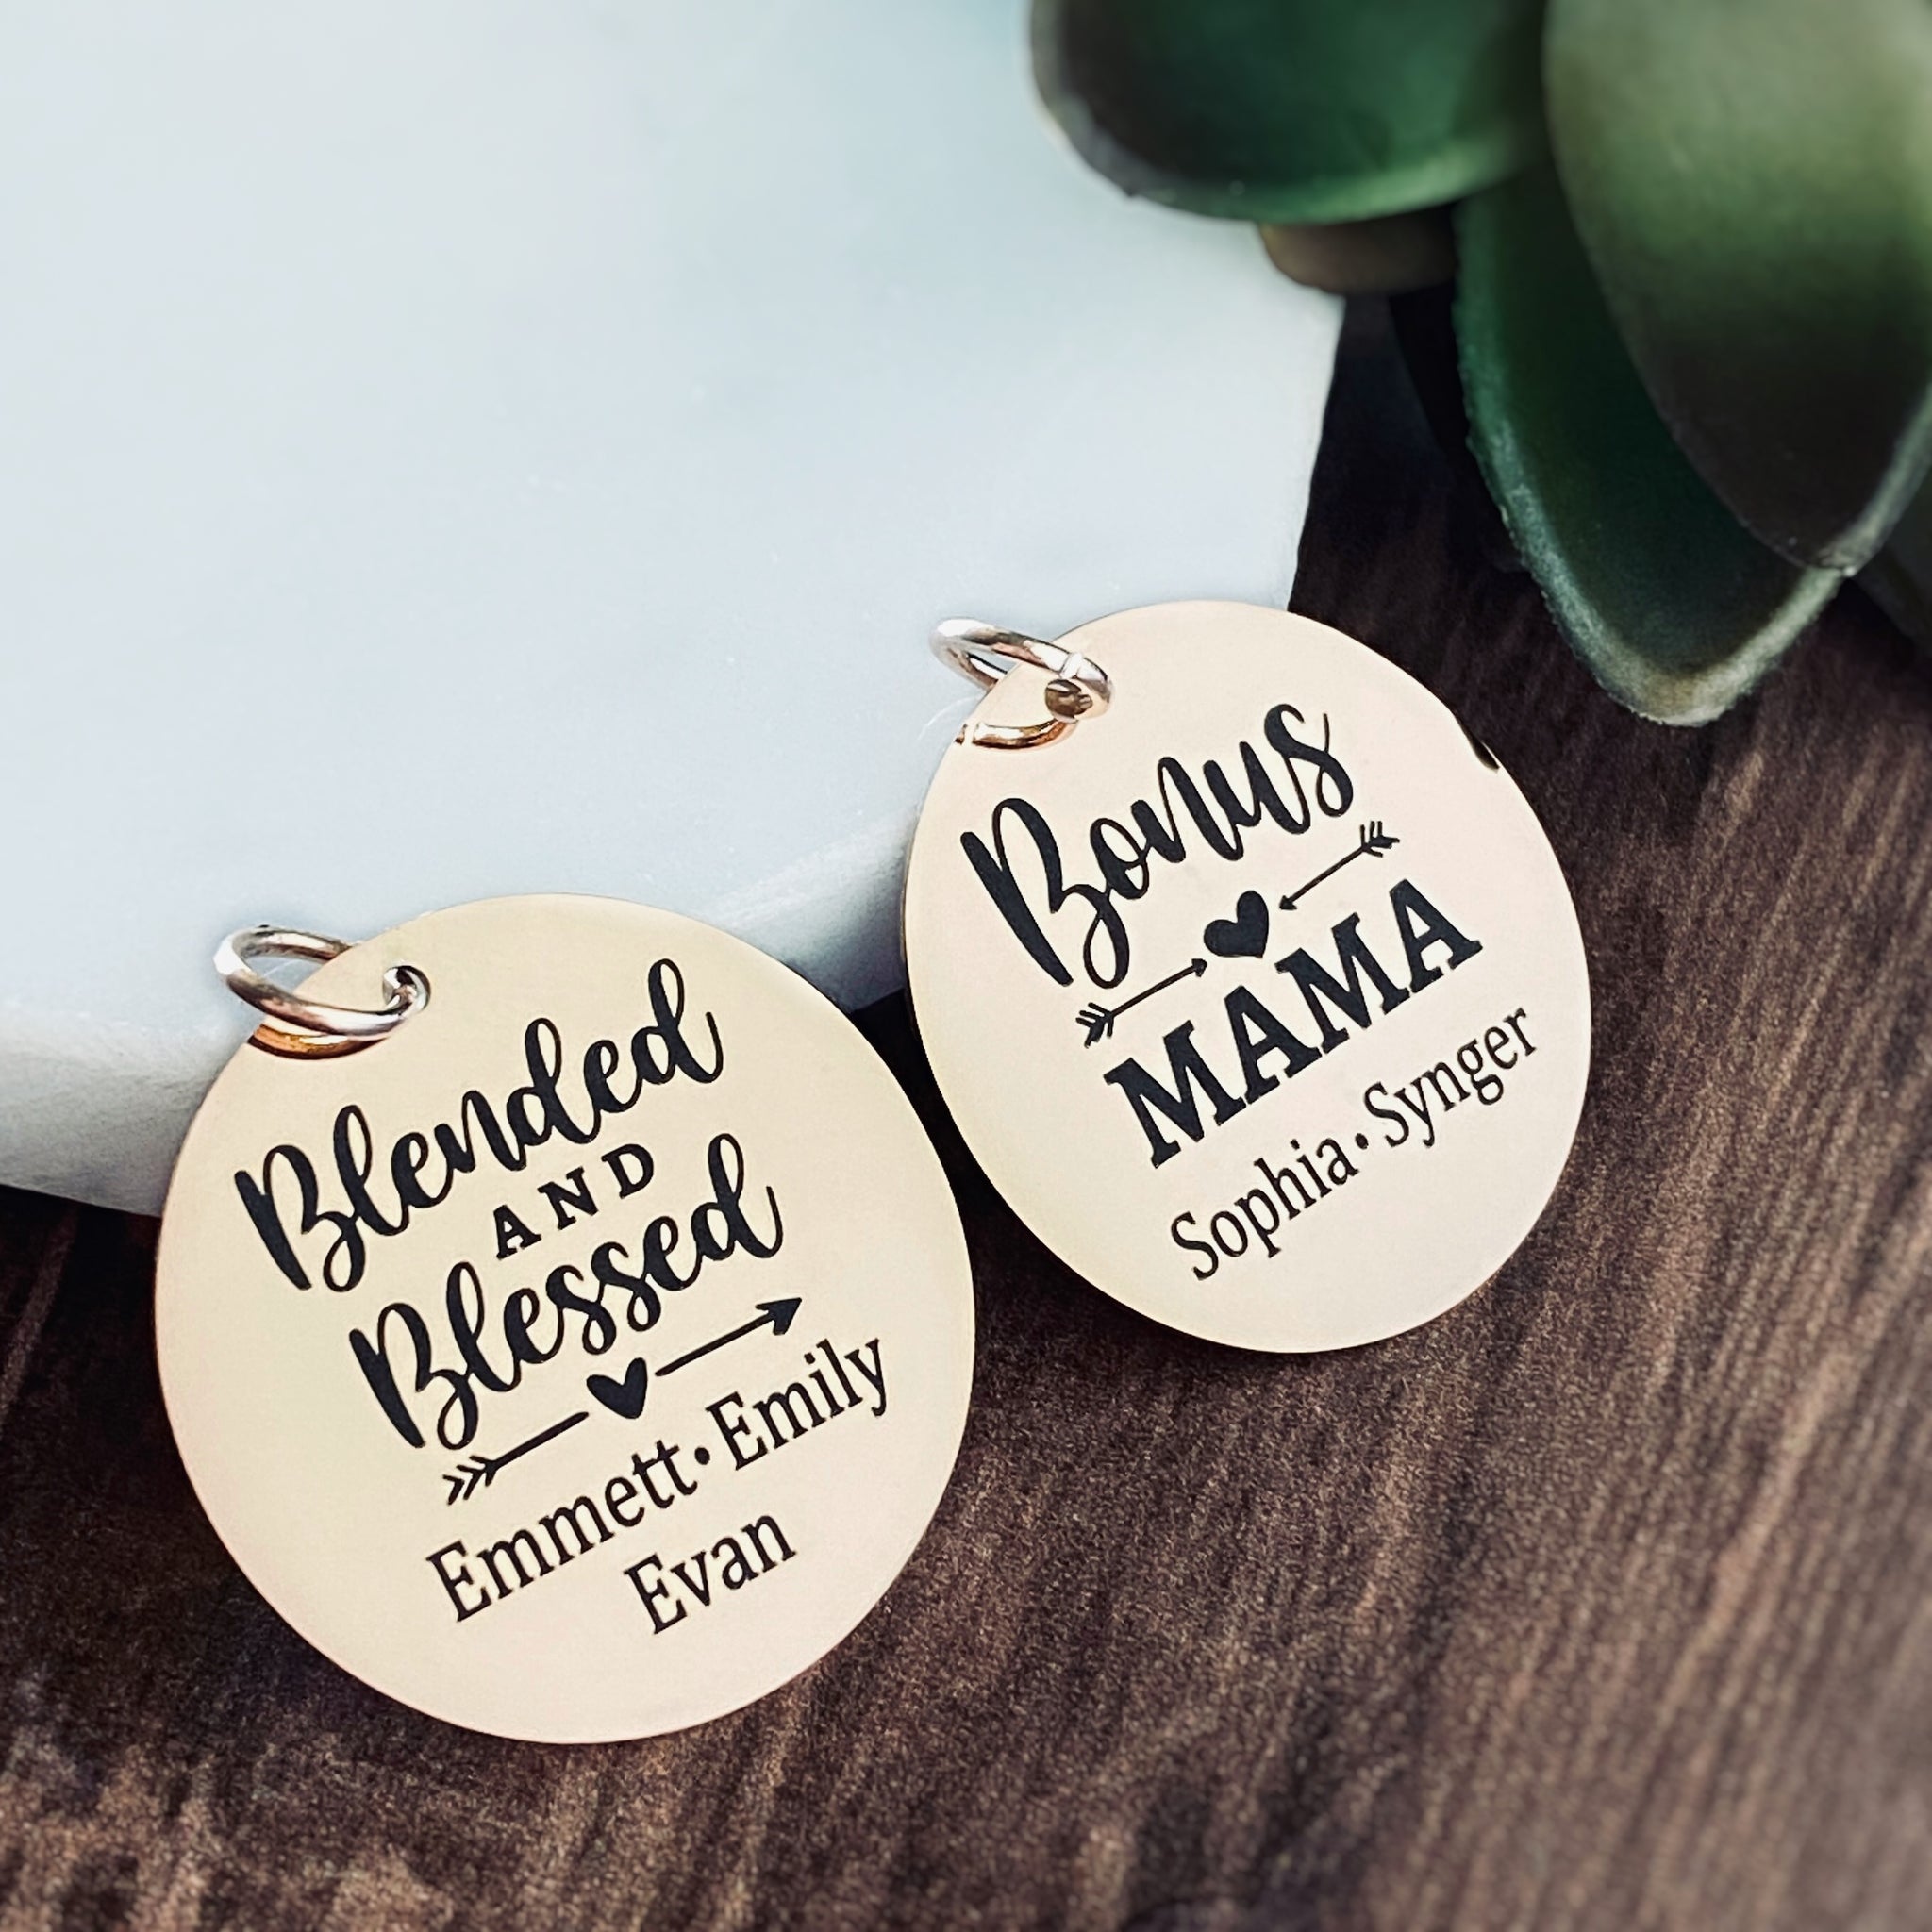 BTTLINGIFT Mom Bday Gift Ideas - Mothers Birthday Gifts for Mom From Son -  Double Side Personalized Keychains - Best Mom Ever Gifts - Bonus Boy Mom